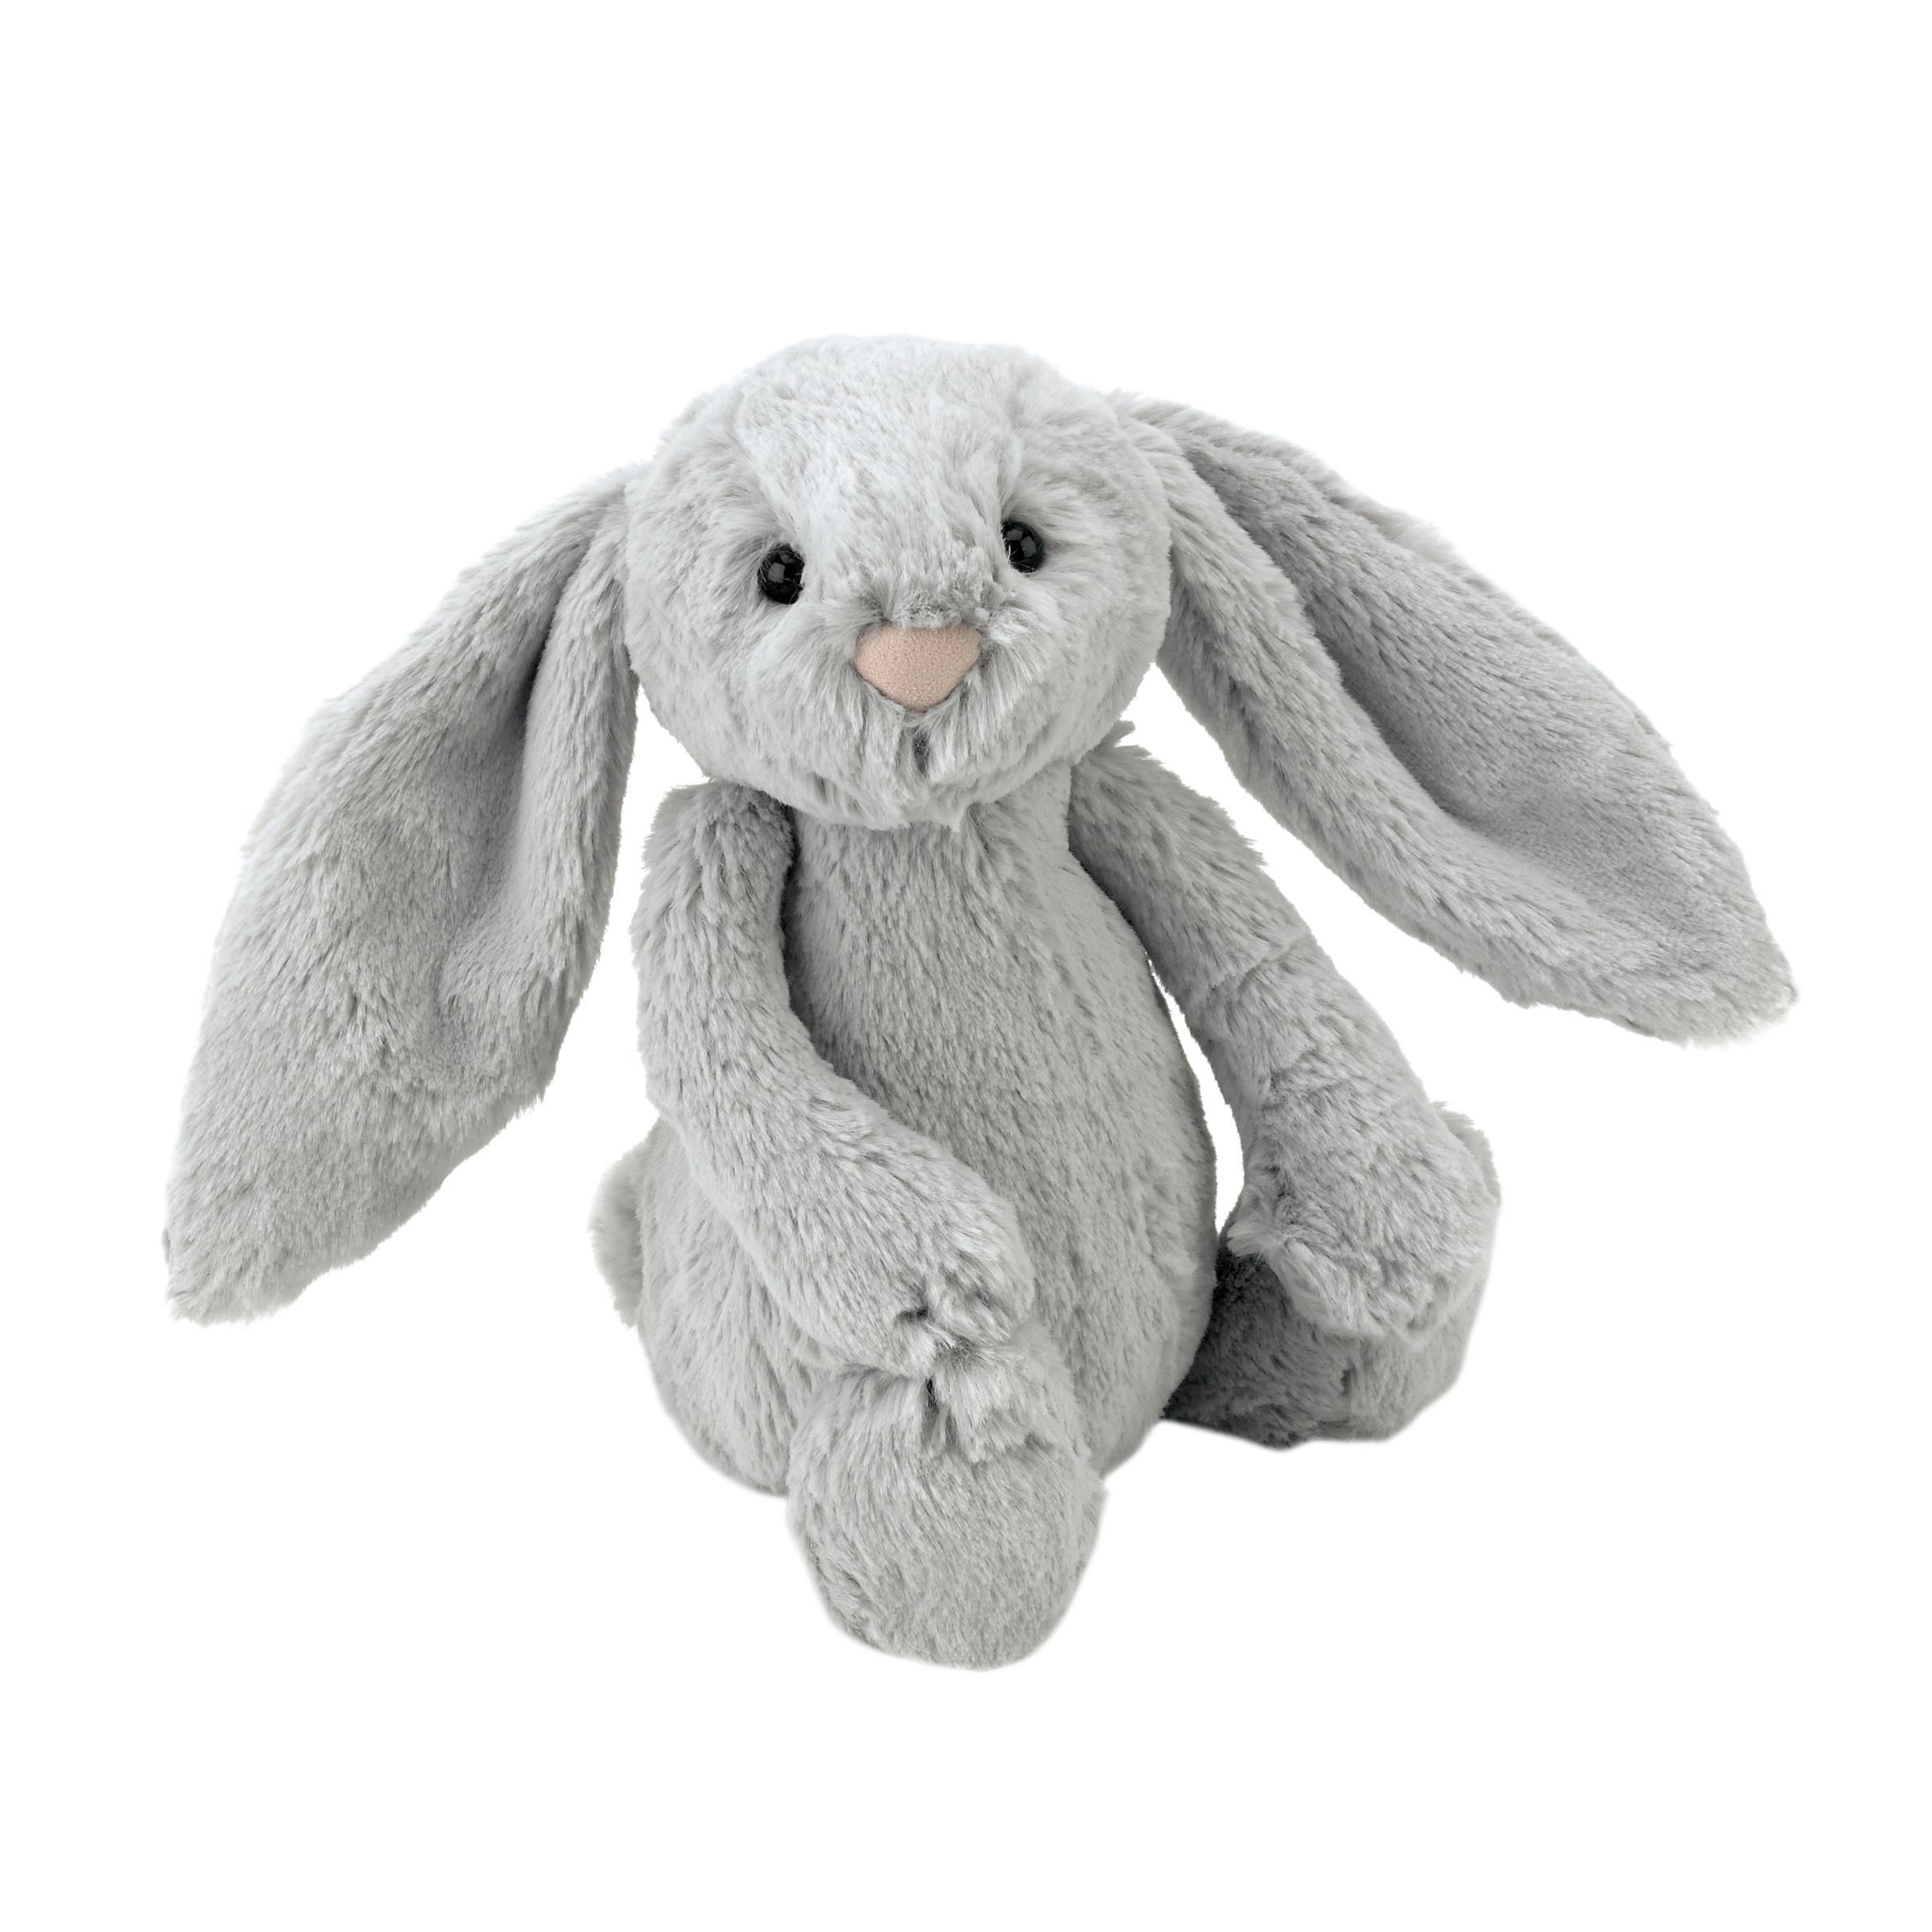 where to buy jellycat toys